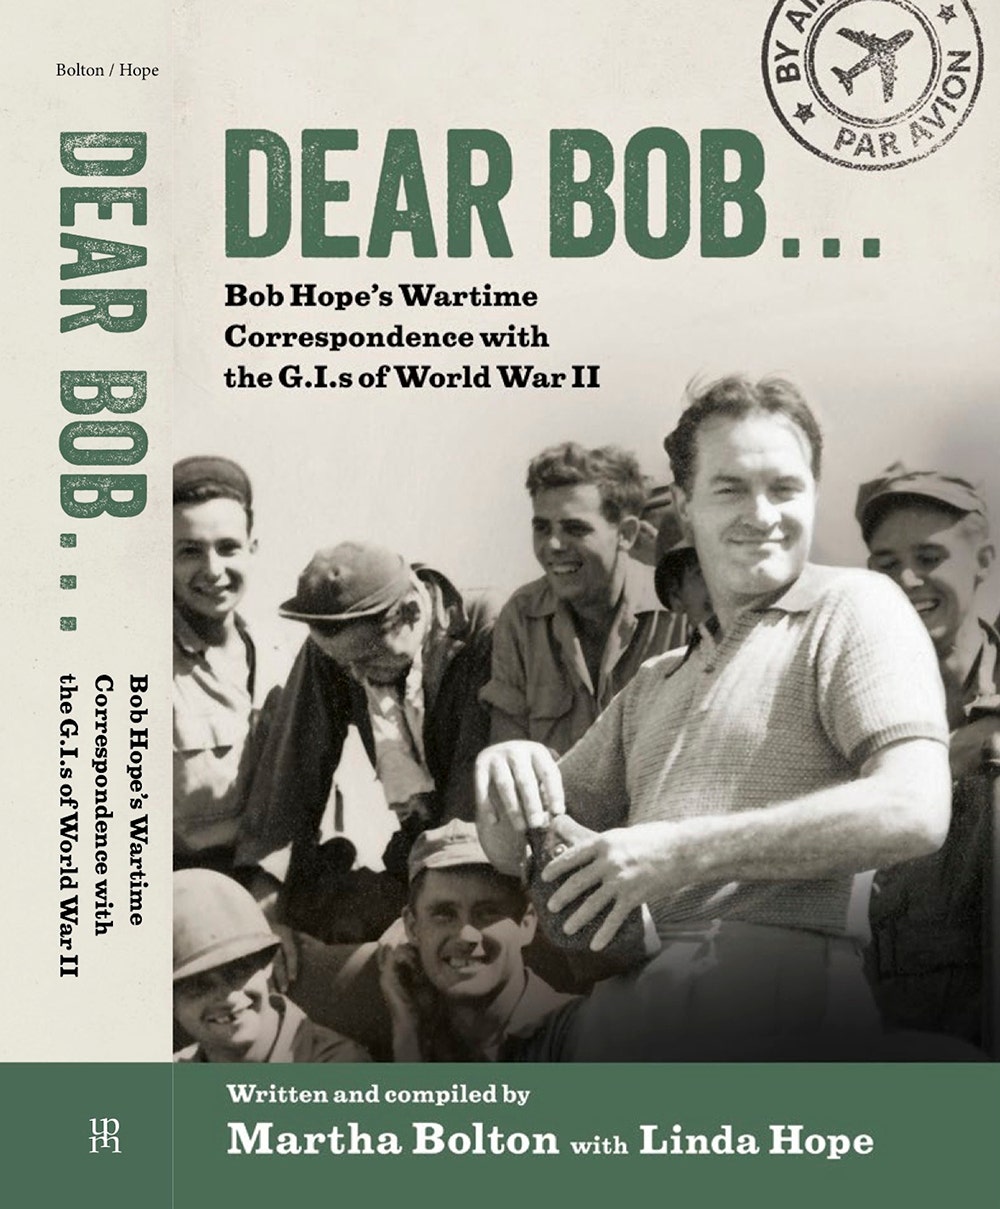 Bob Hope’s letters to troops is a touching reminder to thank veterans, daughter says: 'He loved those guys'